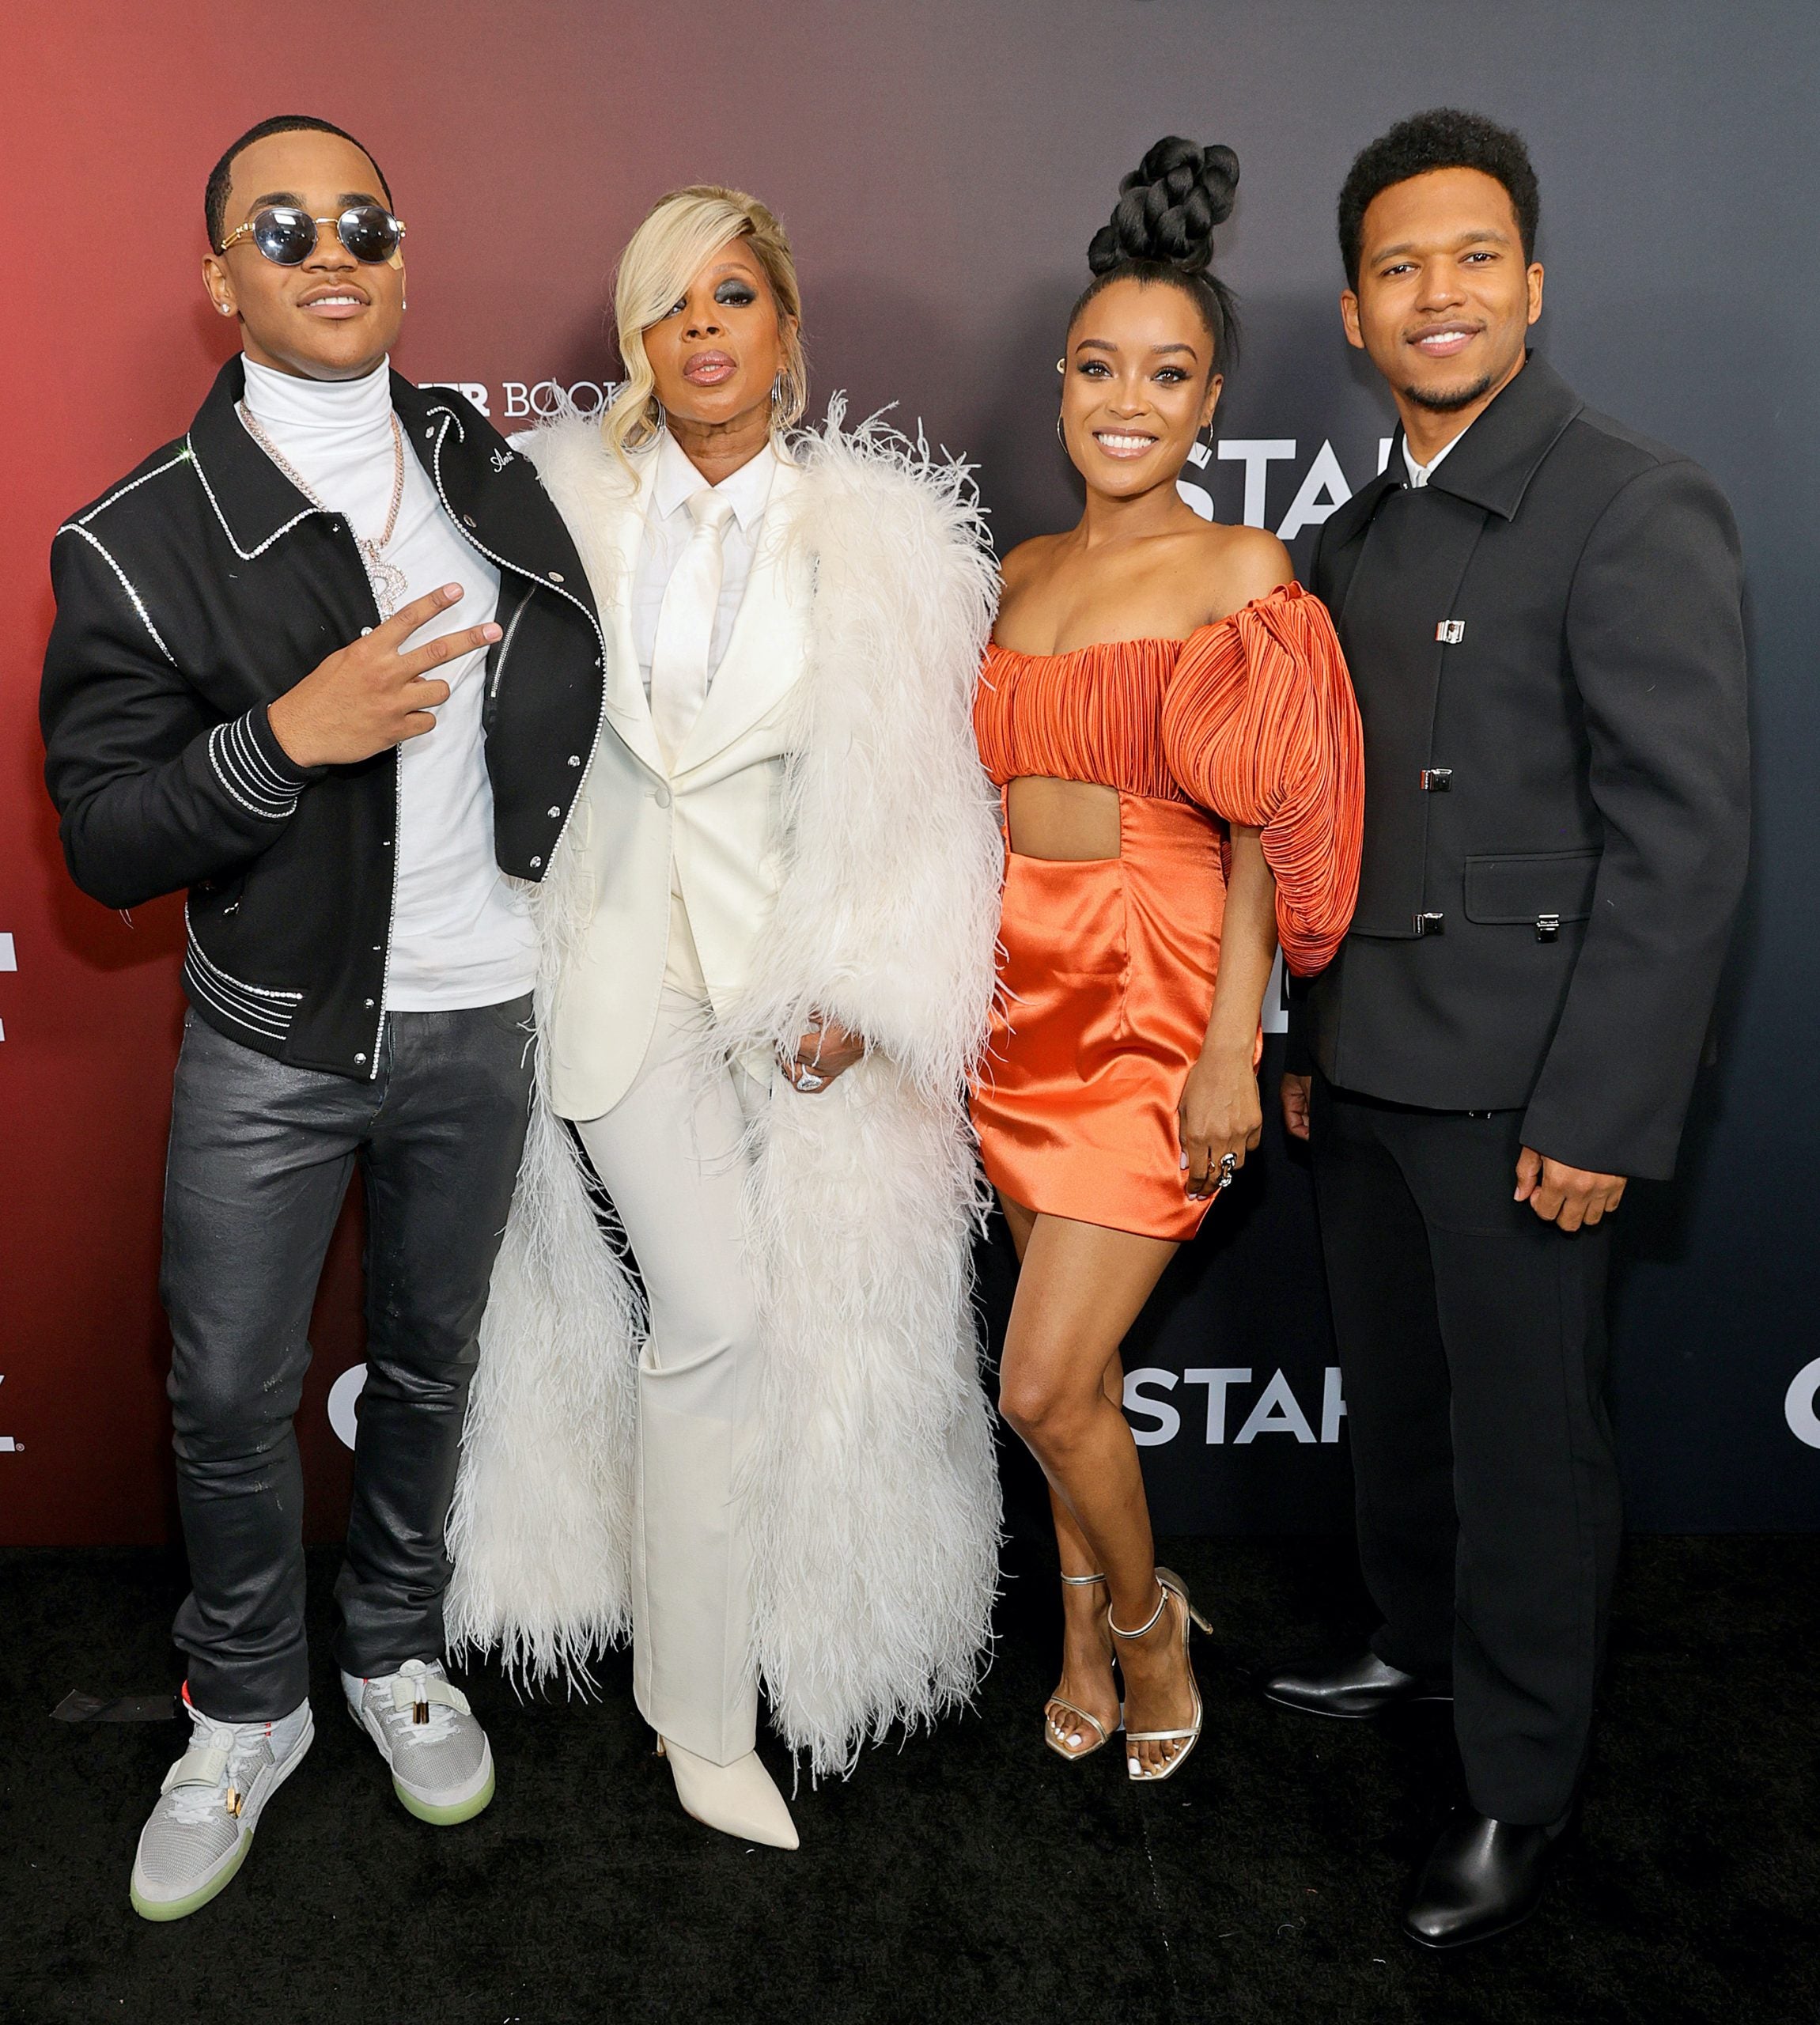 Mary J. Blige is every inch the style at the Power Book II: Ghost premiere  in NYC